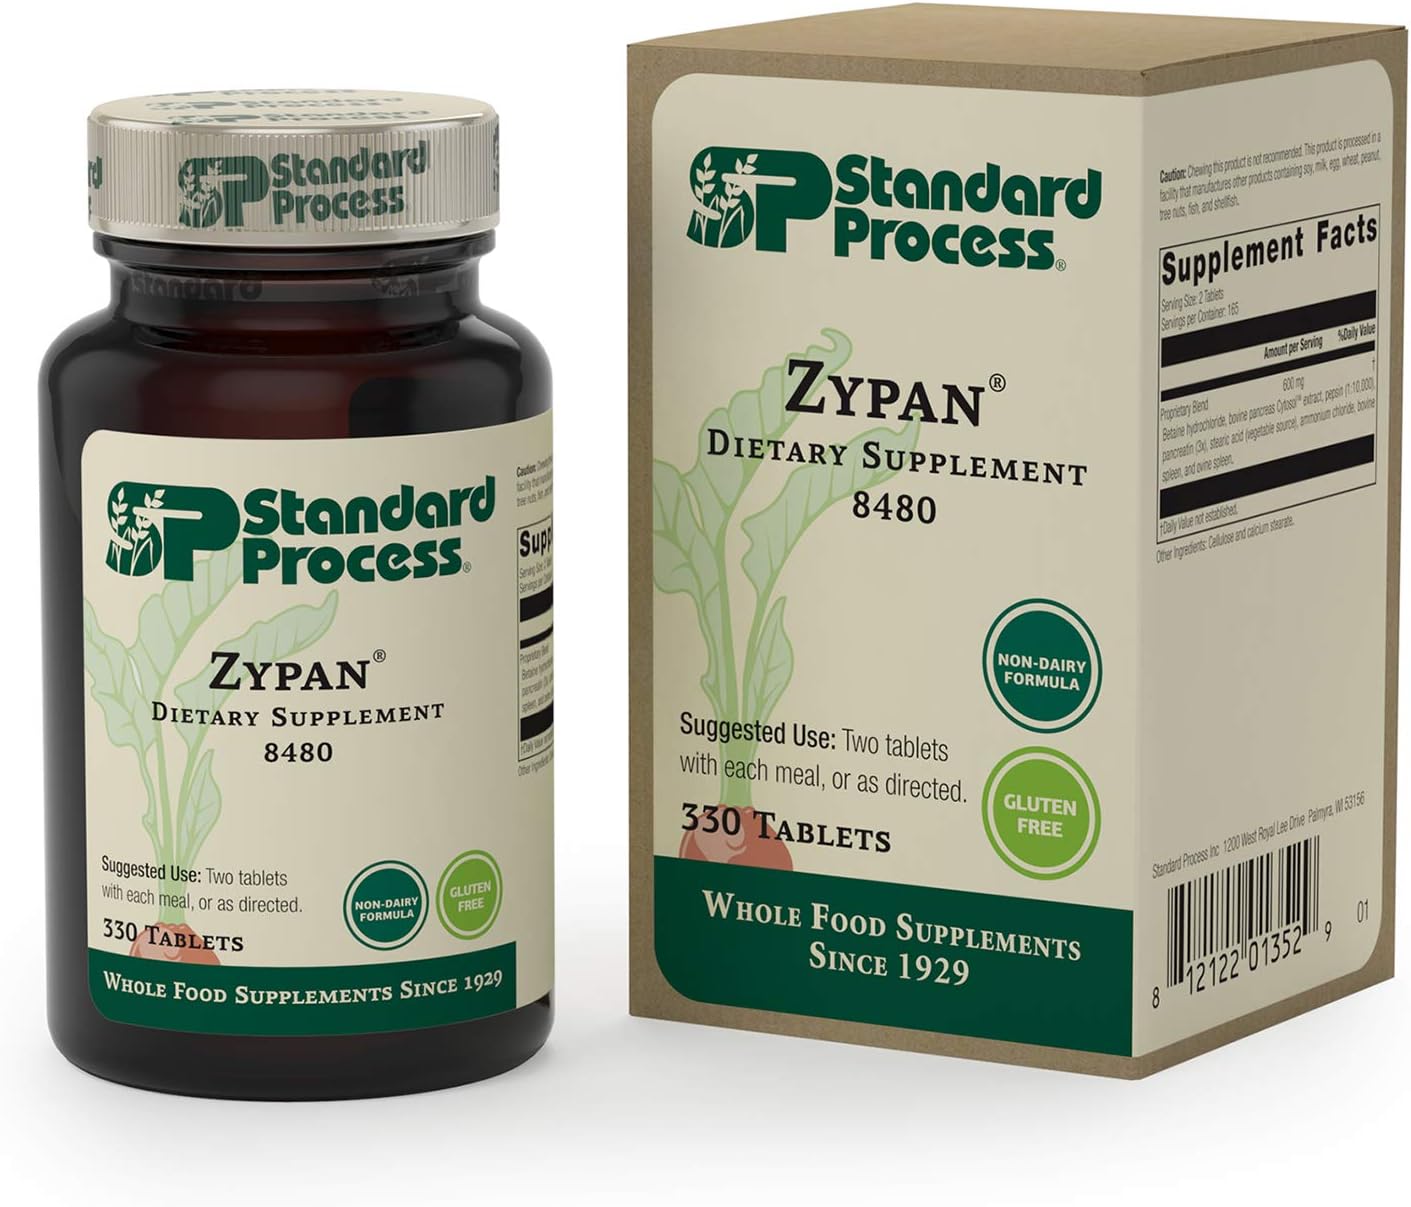 Standard Process Zypan | Digestive Health Support Supplement - HCI Supplement with Pancreatin, Betaine Hydrochloride & Pepsin - Support Macronutrient Digestion | 330 Tablets